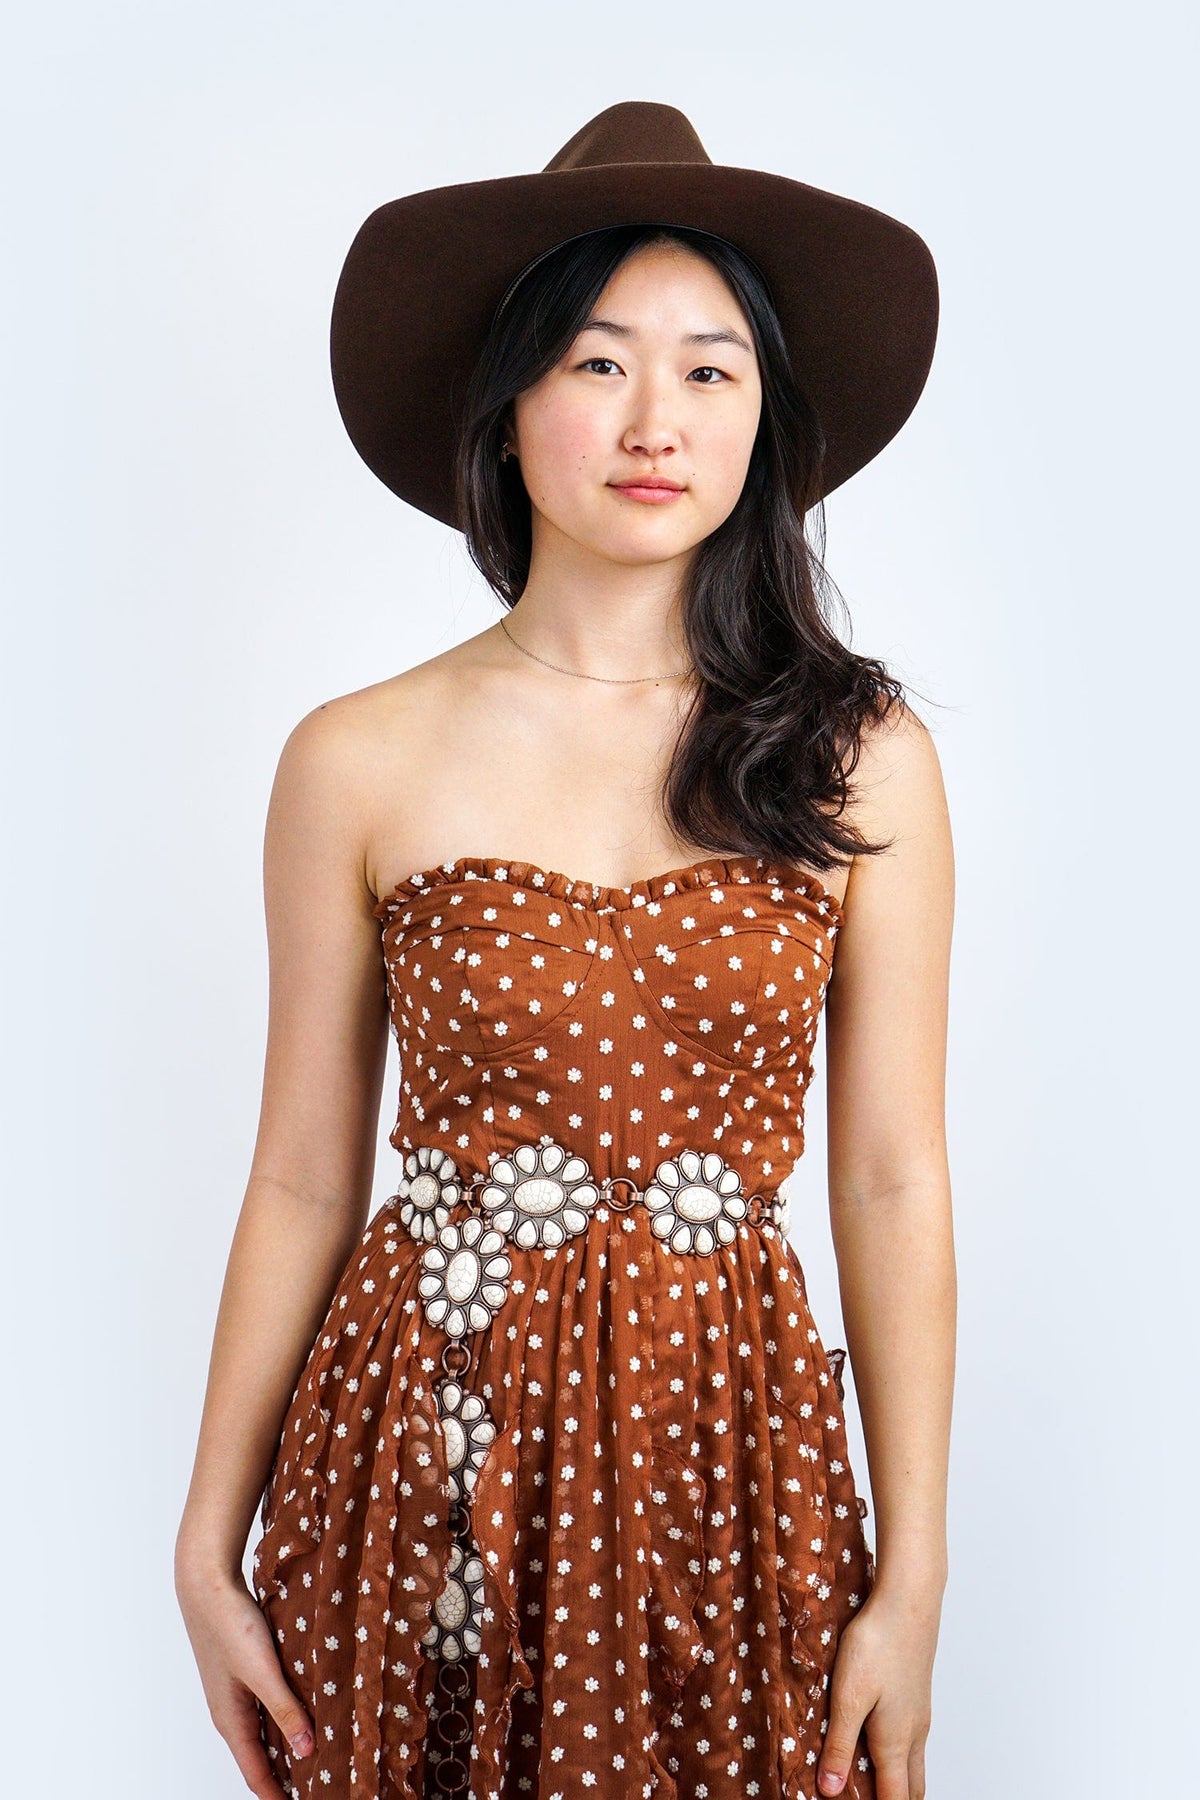 DCD DRESSES Brown and White Embroidered Polka Dot Ruffle Maxi Dress